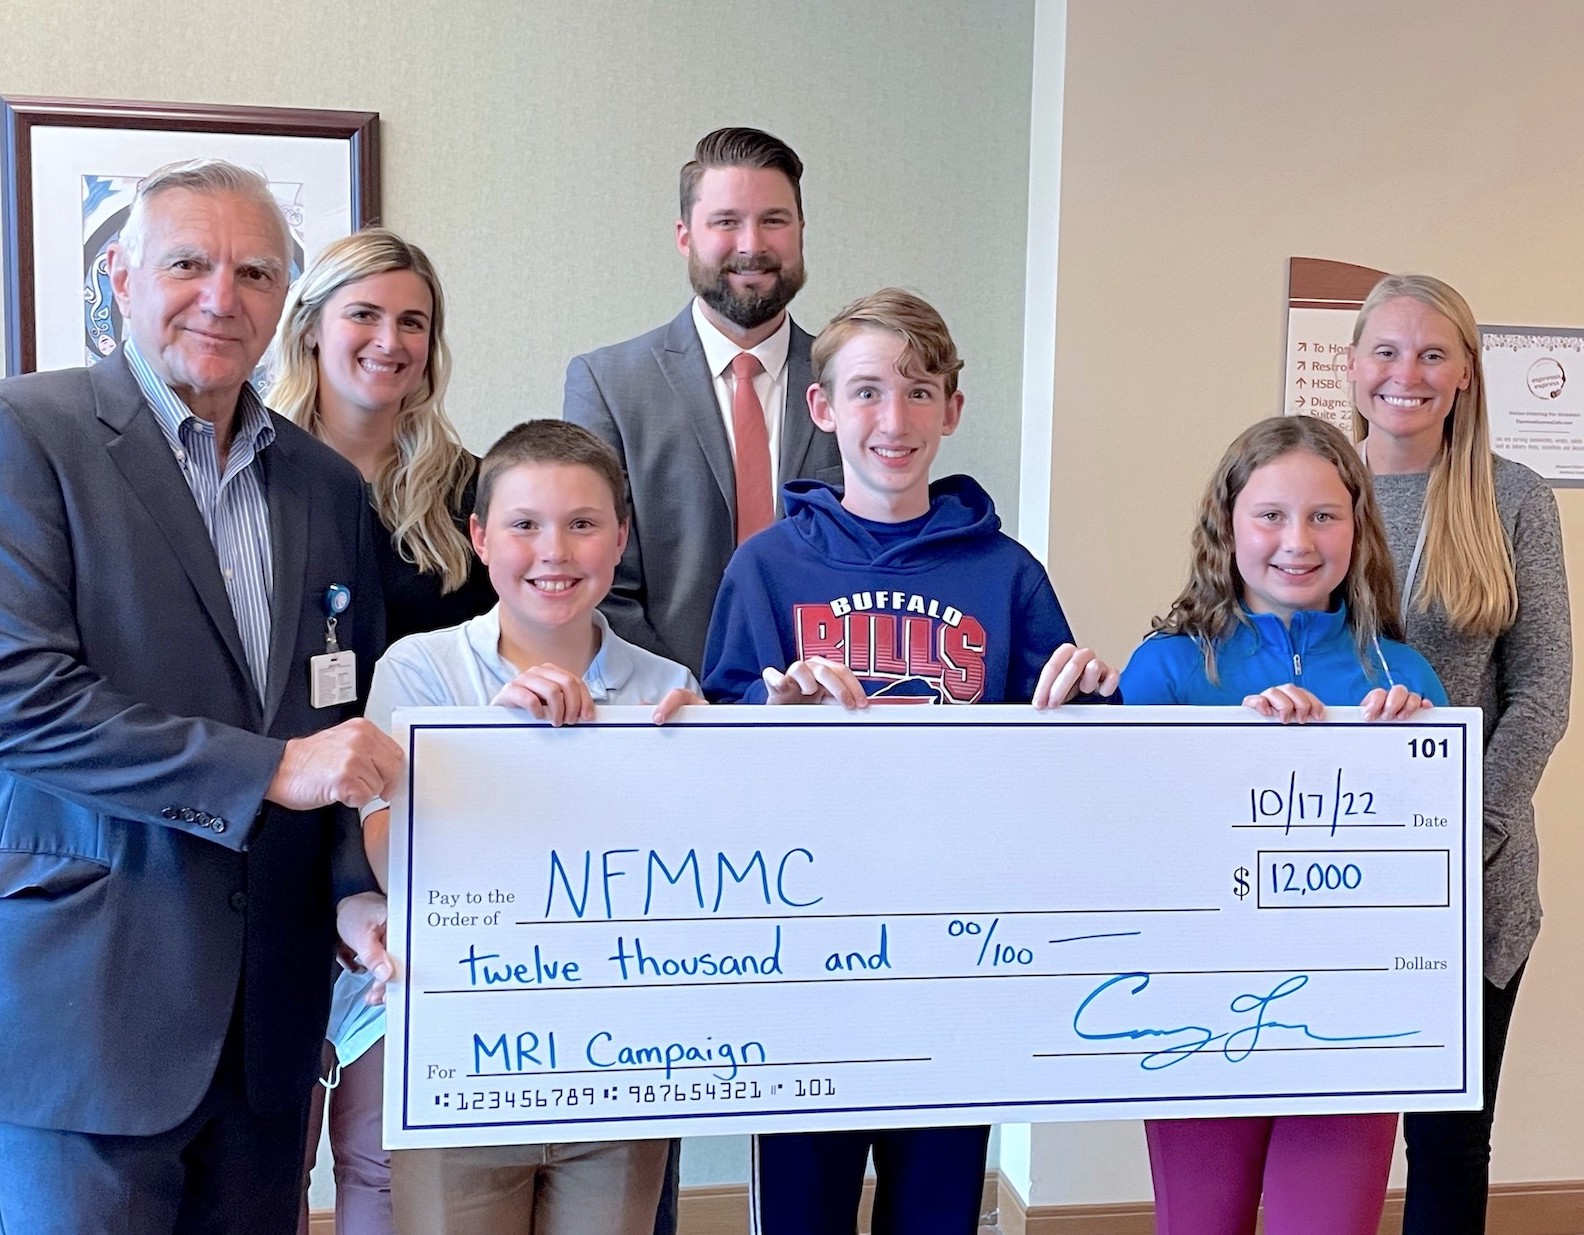 Pictured, from left: Joseph Ruffolo, president and CEO at Niagara Falls Memorial Medical Center; Kelsey Leitten, sixth grade teacher at Starpoint; Stephen Carlson, student; Dr. Corey Gray, Starpoint Middle School principal, Peter McGrath, student; Samantha Rucci, student; and Kristie Slack, seventh grade teacher. (Submitted photo)